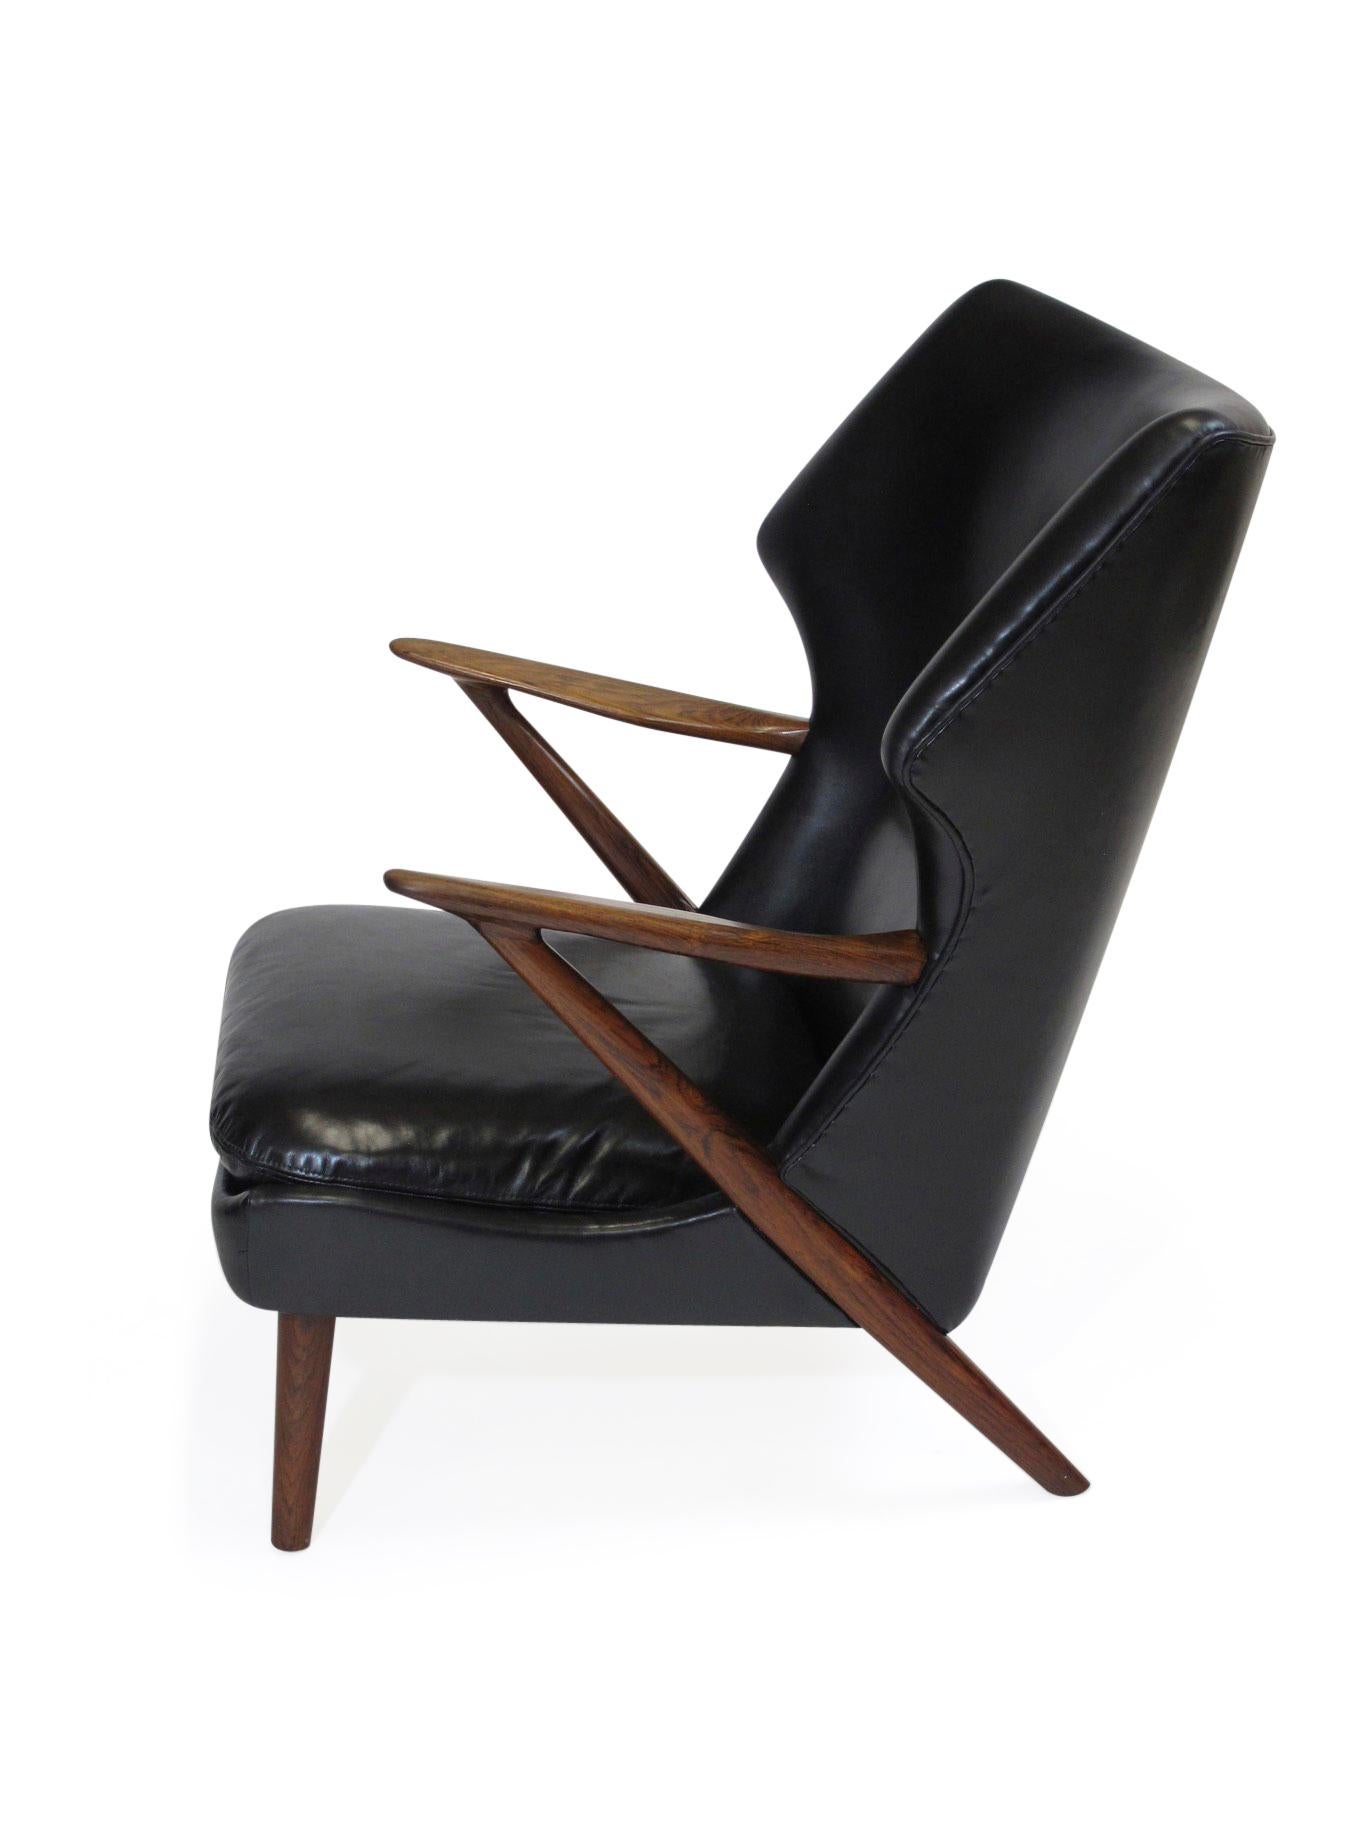 Midcentury lounge chair designed by Kurt Olsen for Slagelse Mobelvaerk, Model 221. Rare rosewood frame with sculpted wide arms, upholstered in new black leather to the exact specifications of original tailoring.